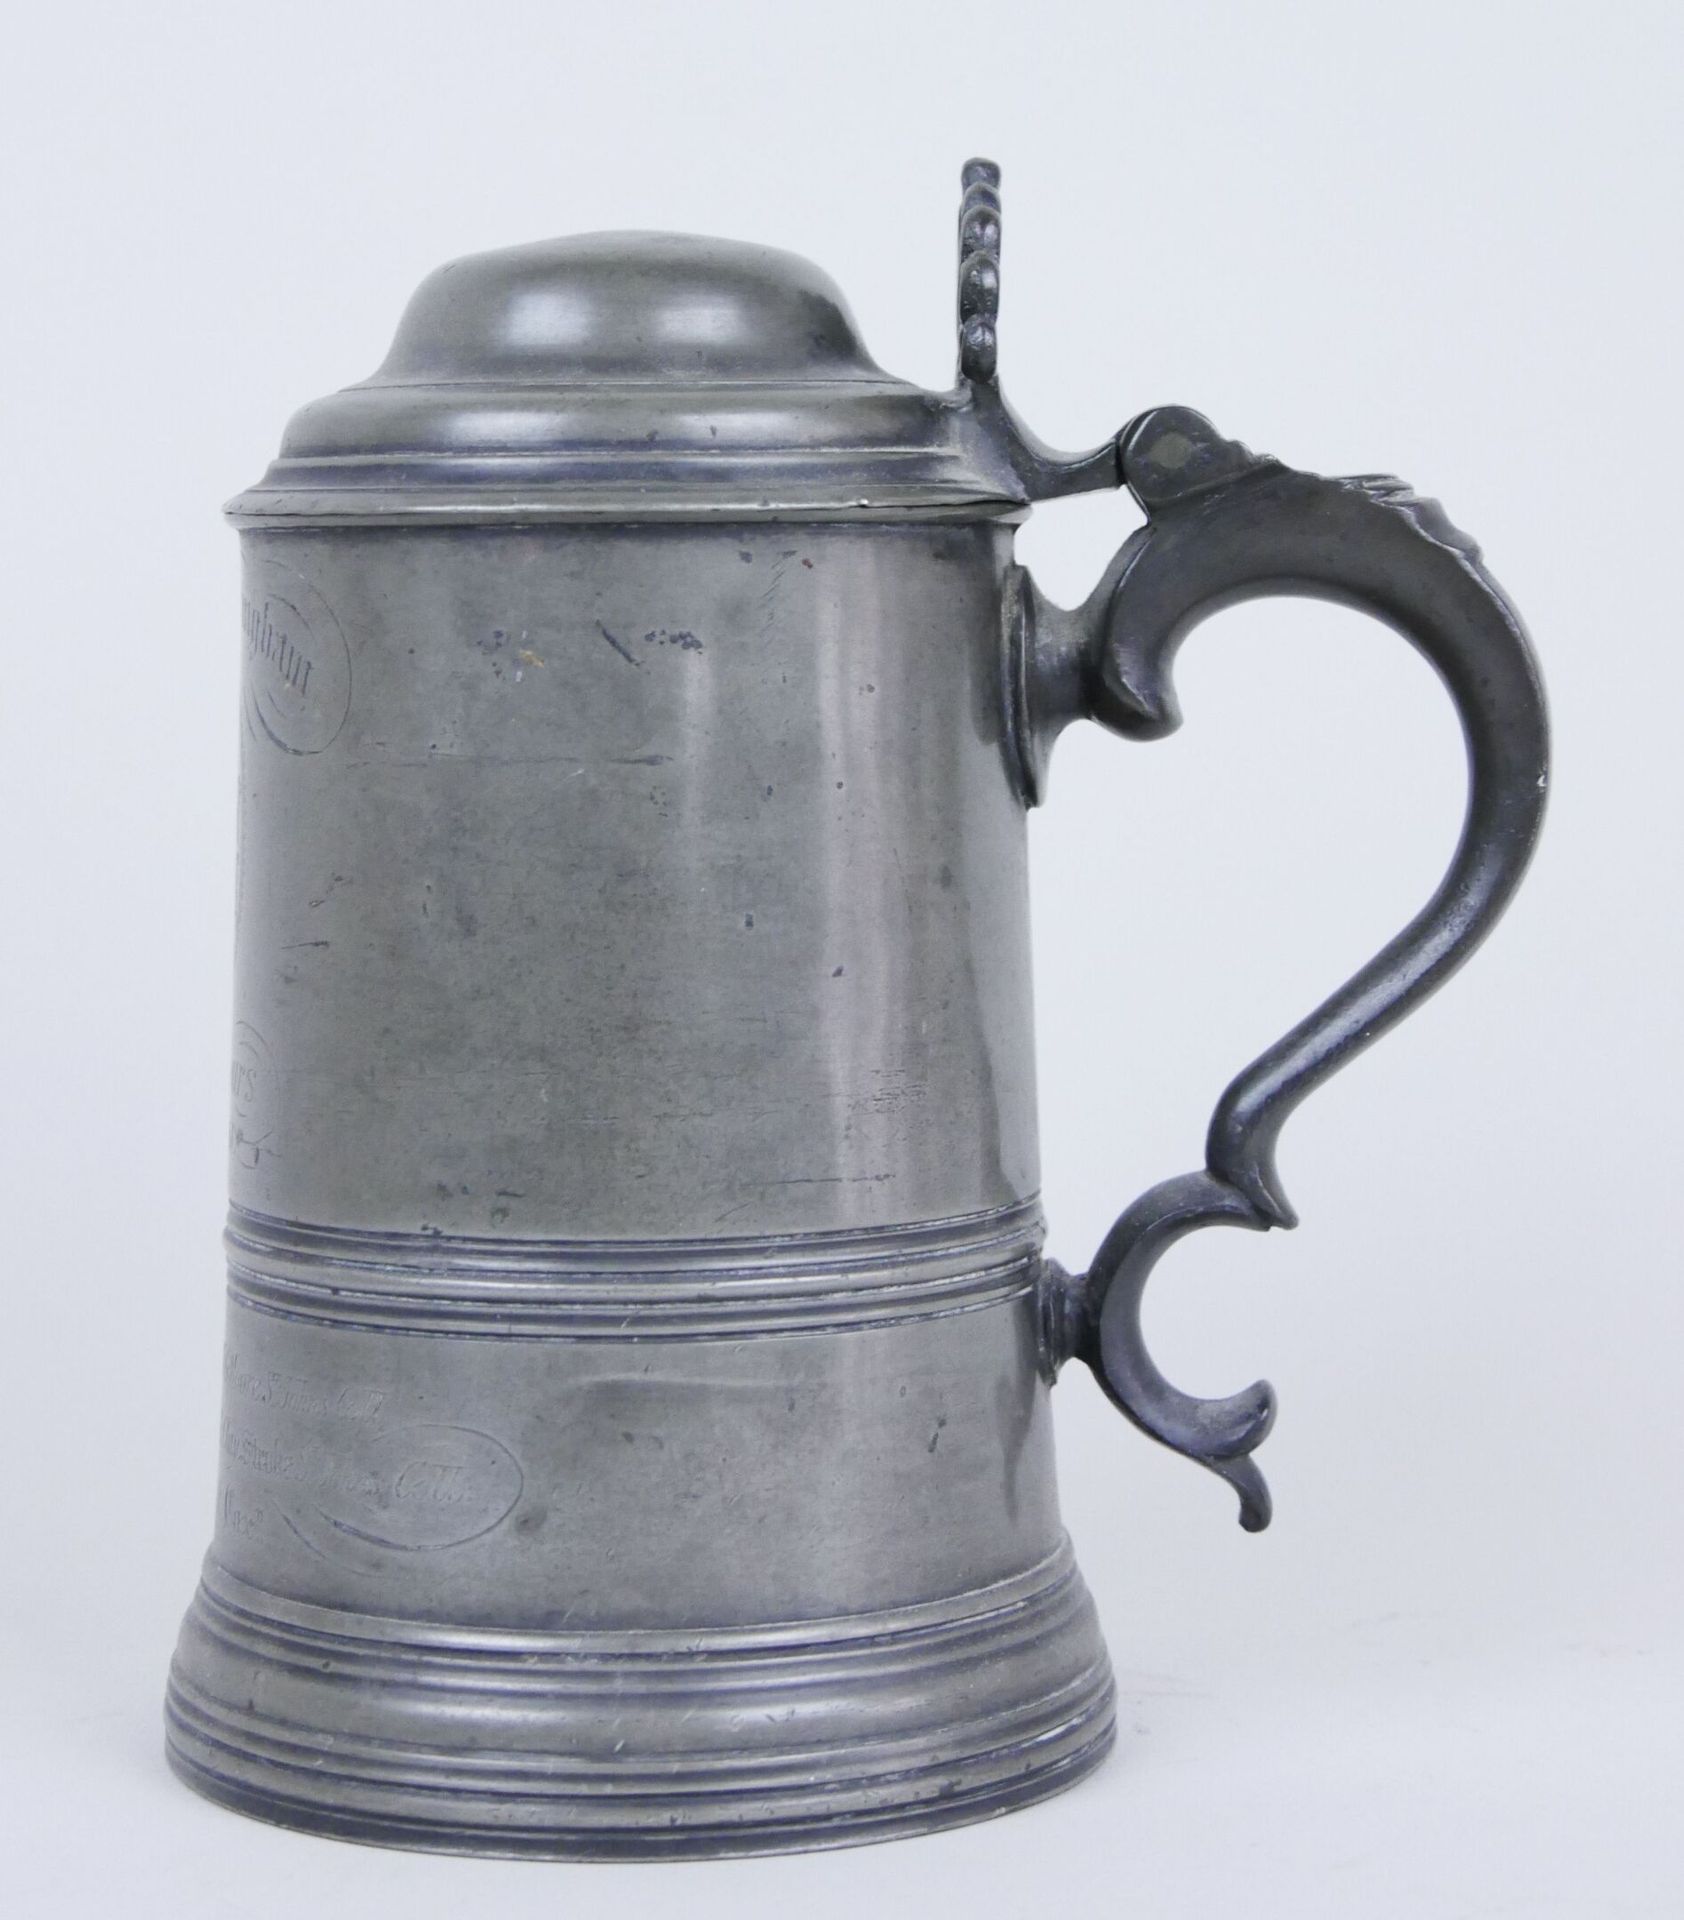 Null Pewter beer mug, the bottom in glass, dated " Nov 12 - 1861 ".

English wor&hellip;